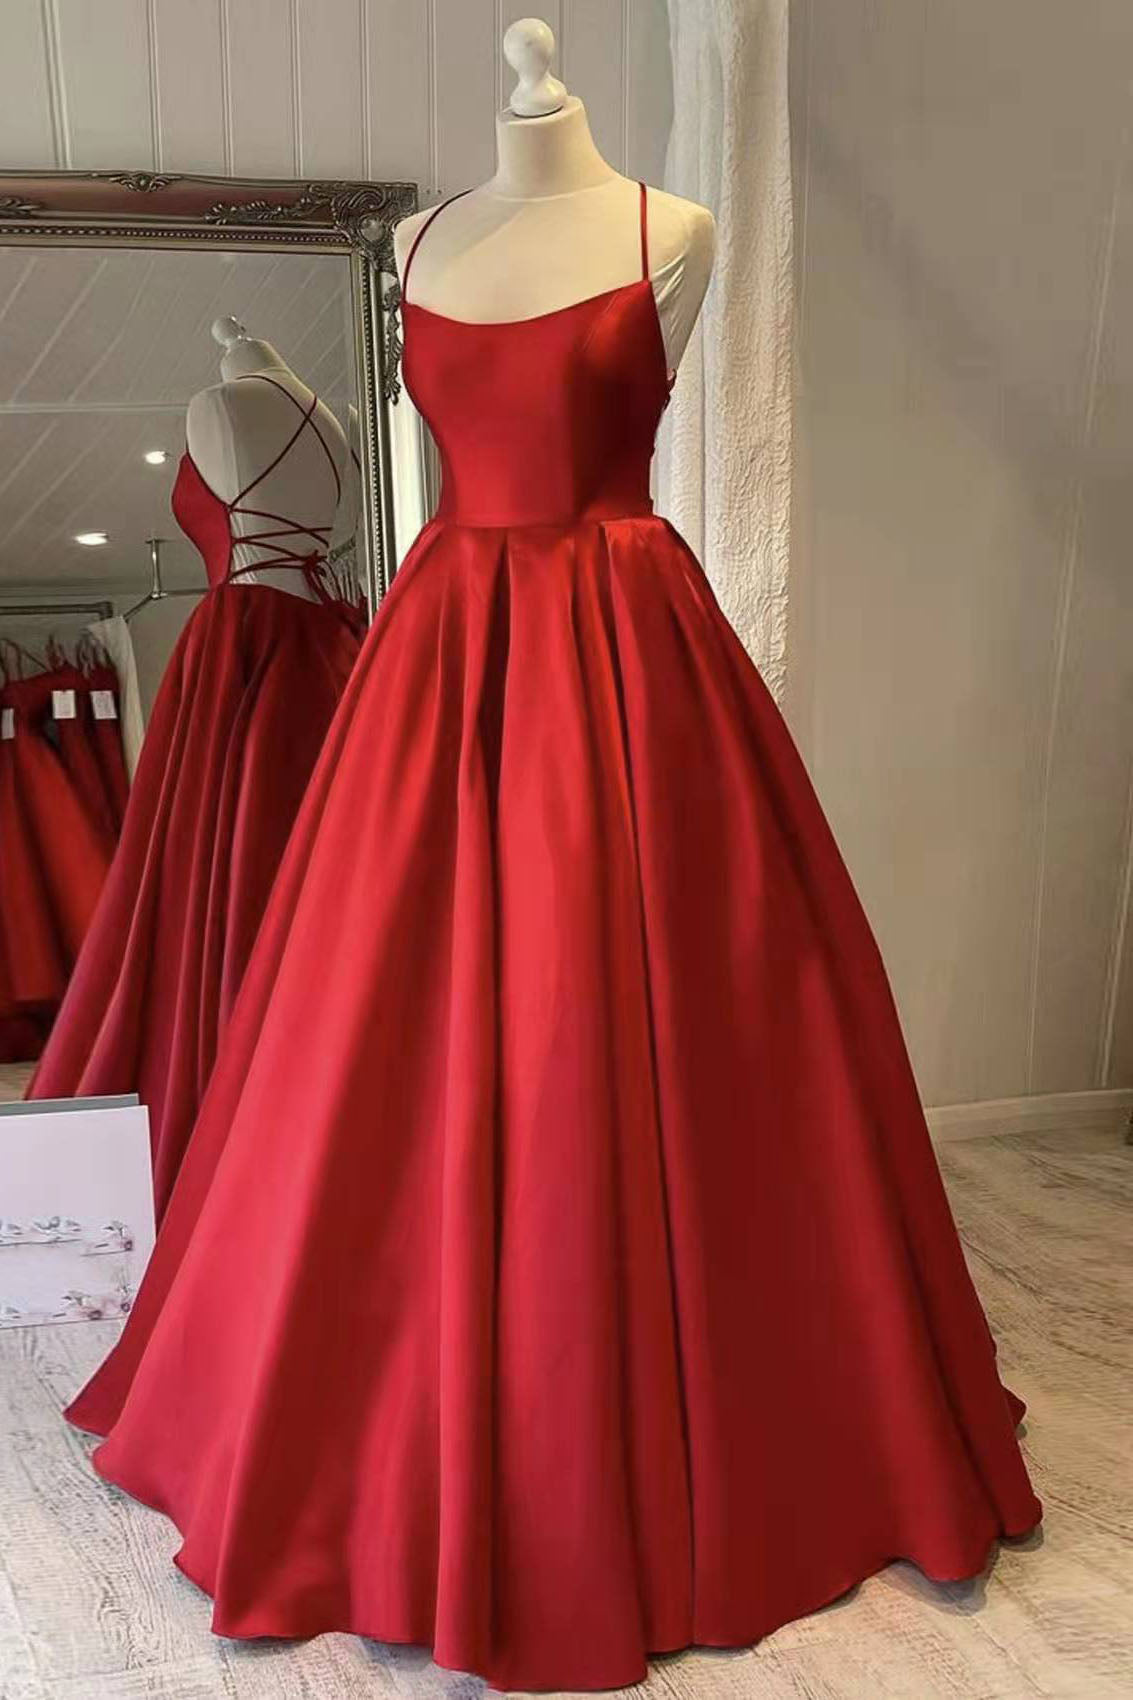 Dinner Outfit, Red Satin Spaghetti Straps Long Prom Dress, Puffy Princess Formal Gown